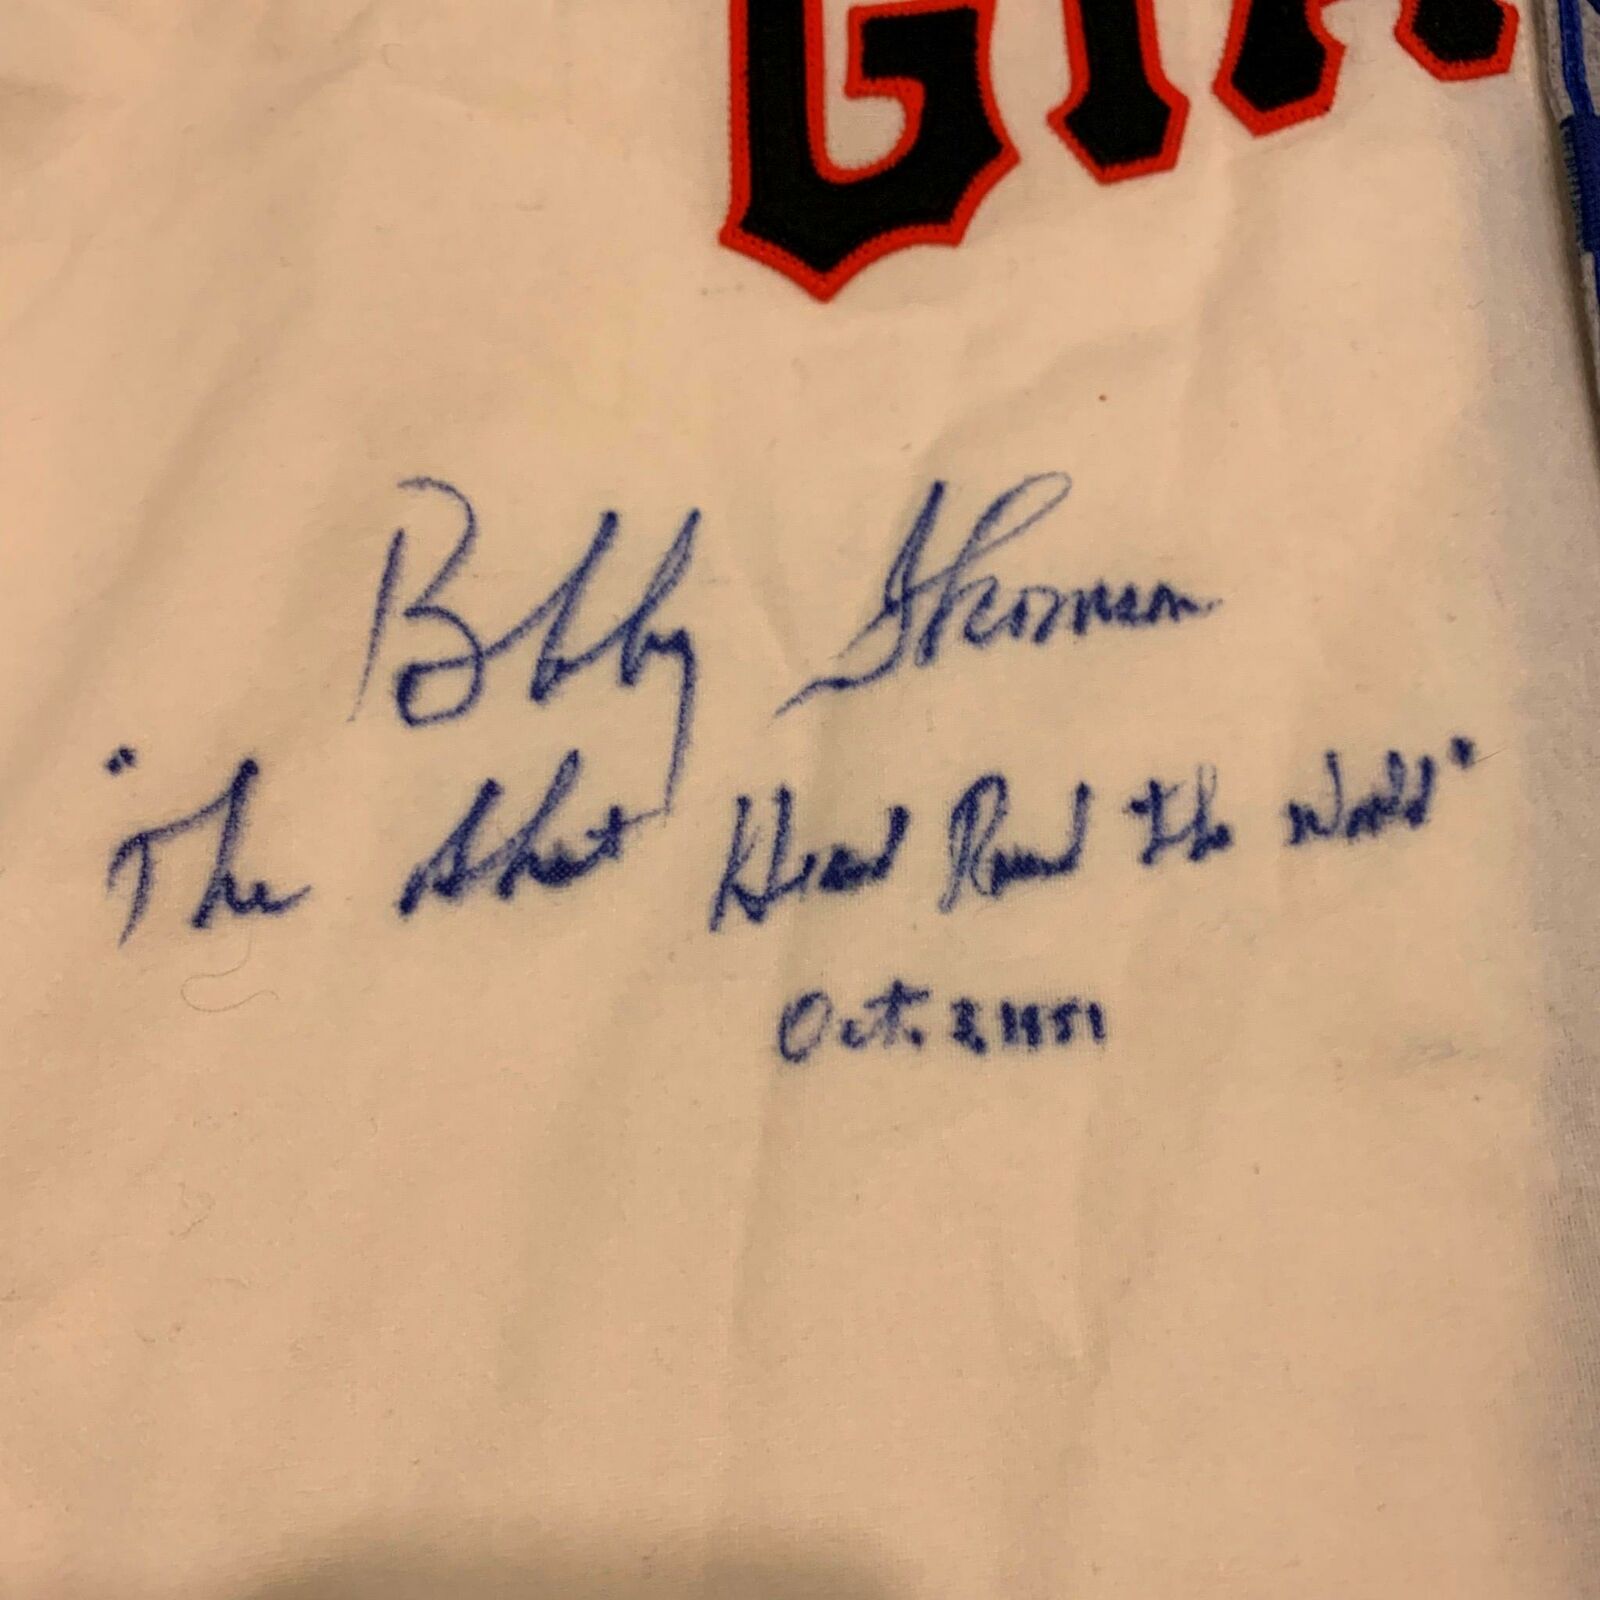 Lot Detail - Bobby Thomson & Ralph Branca Signed Giants/Dodgers Jersey